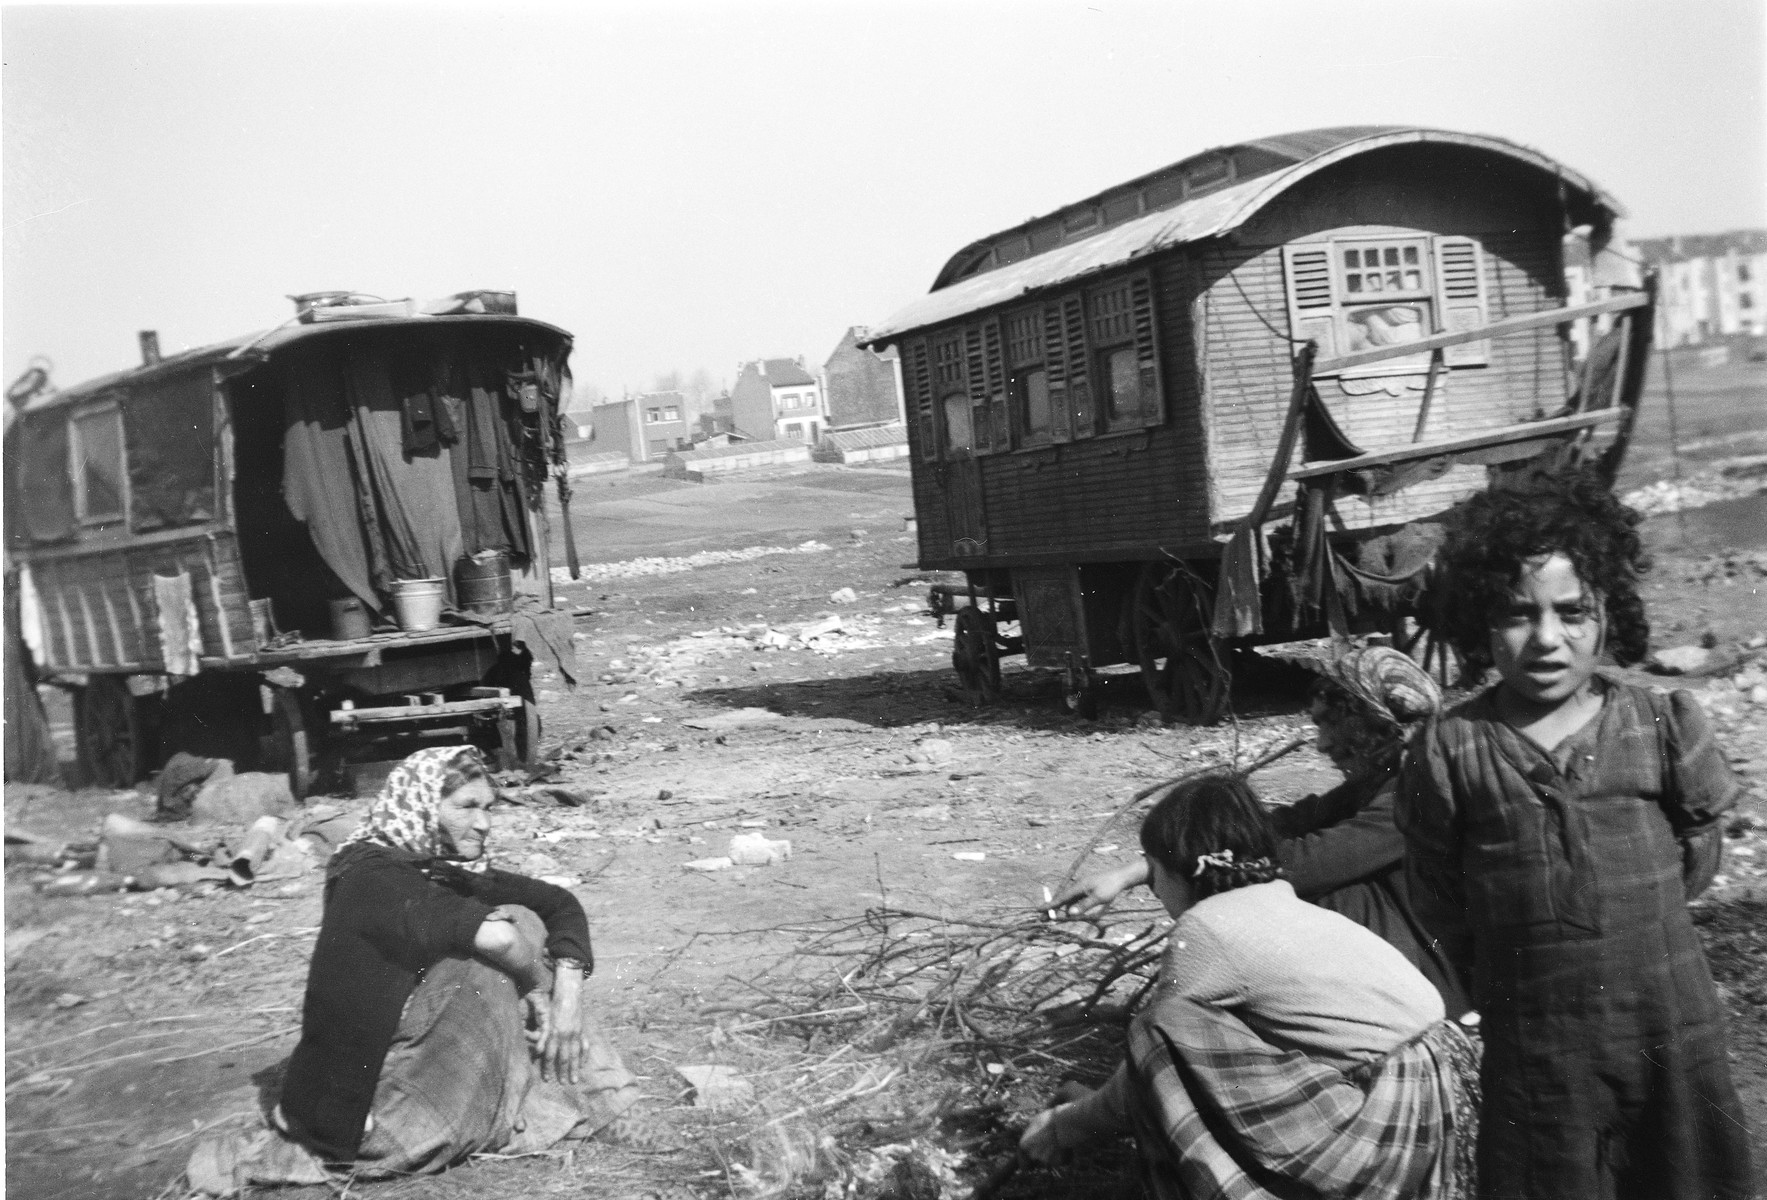 A young Romani girl stands facing the camera, with several seated women and two caravans behind her.